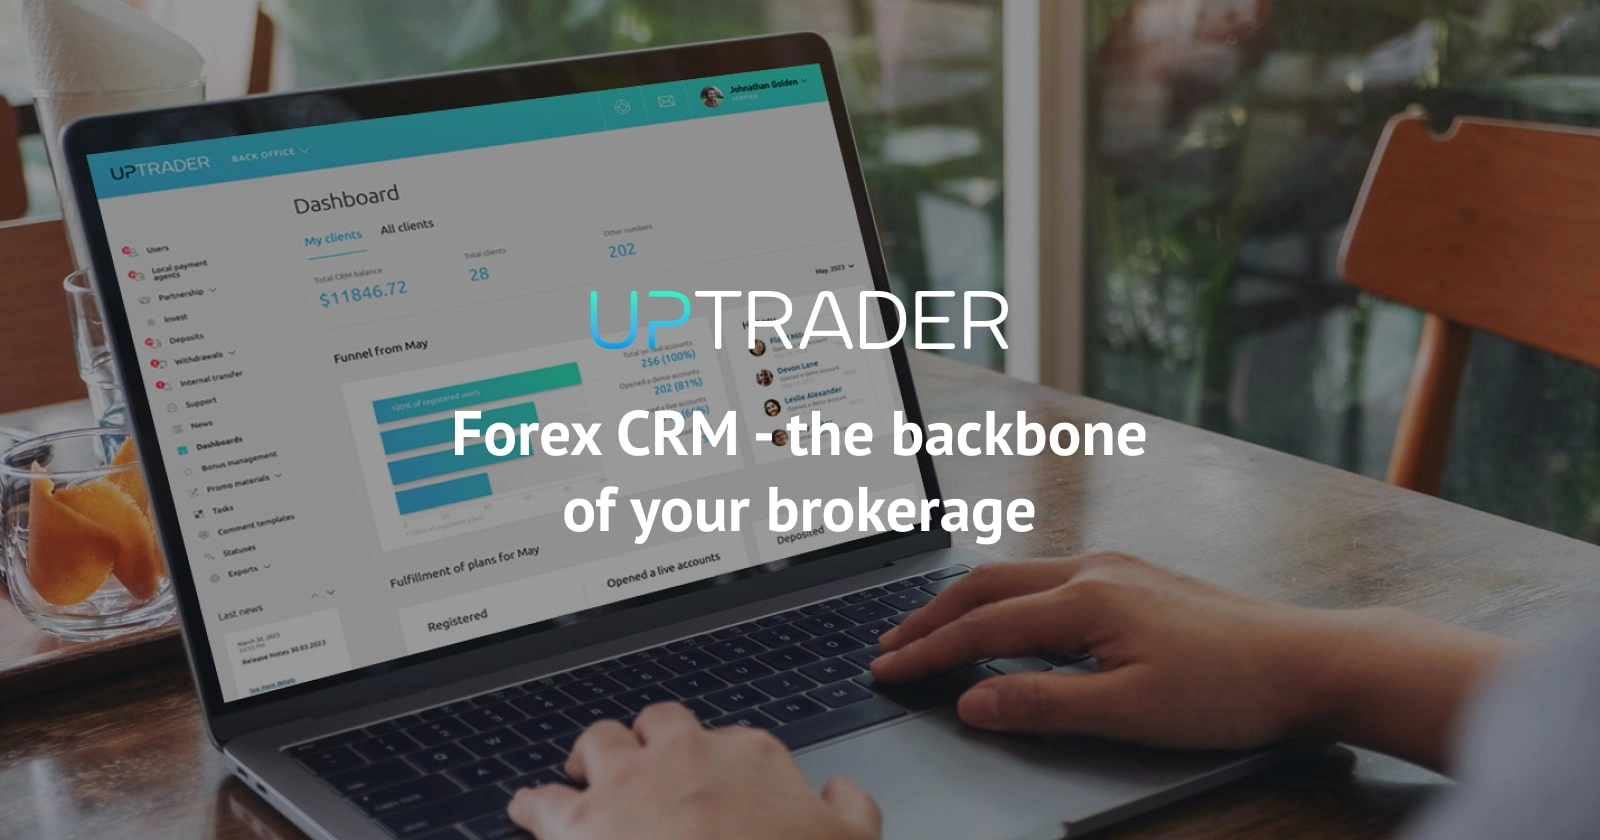 Forex CRM - the backbone of your brokerage